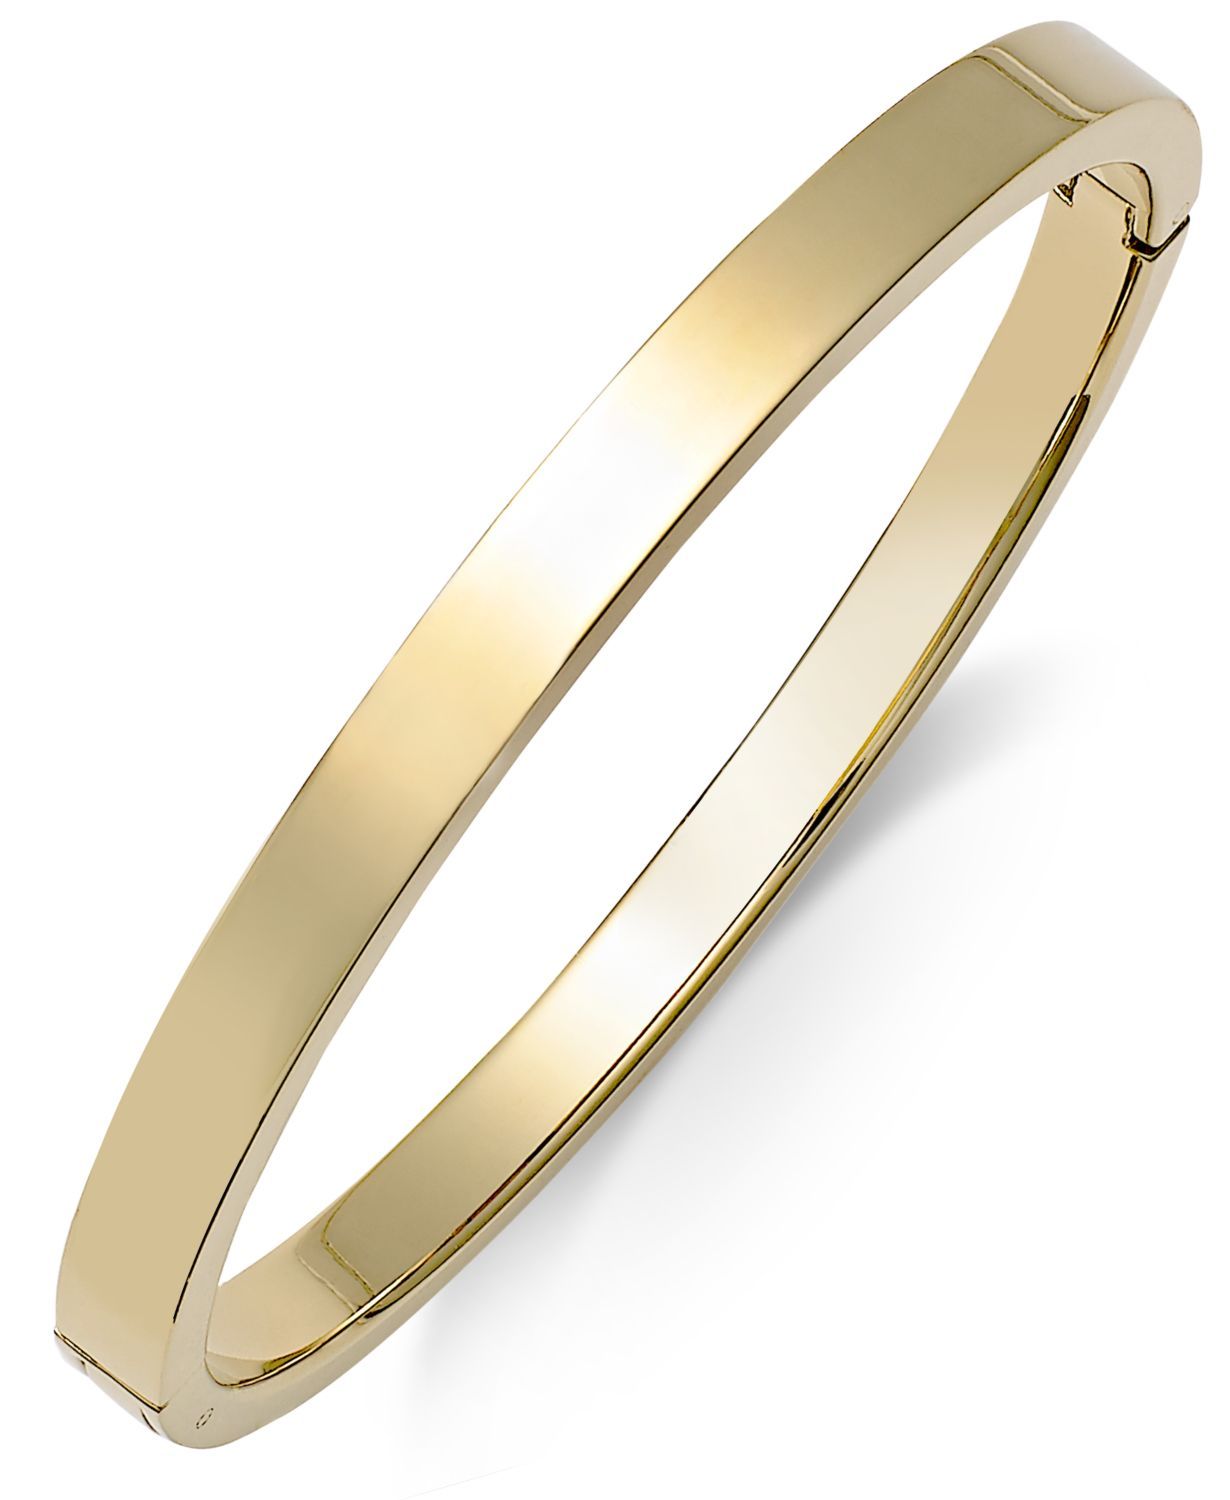 Polished Smooth Bangle Bracelet in Metallic Yellow Ion-Plated Stainless Steel, Rose Ion-Plated Stainless Steel, or Stainless Steel